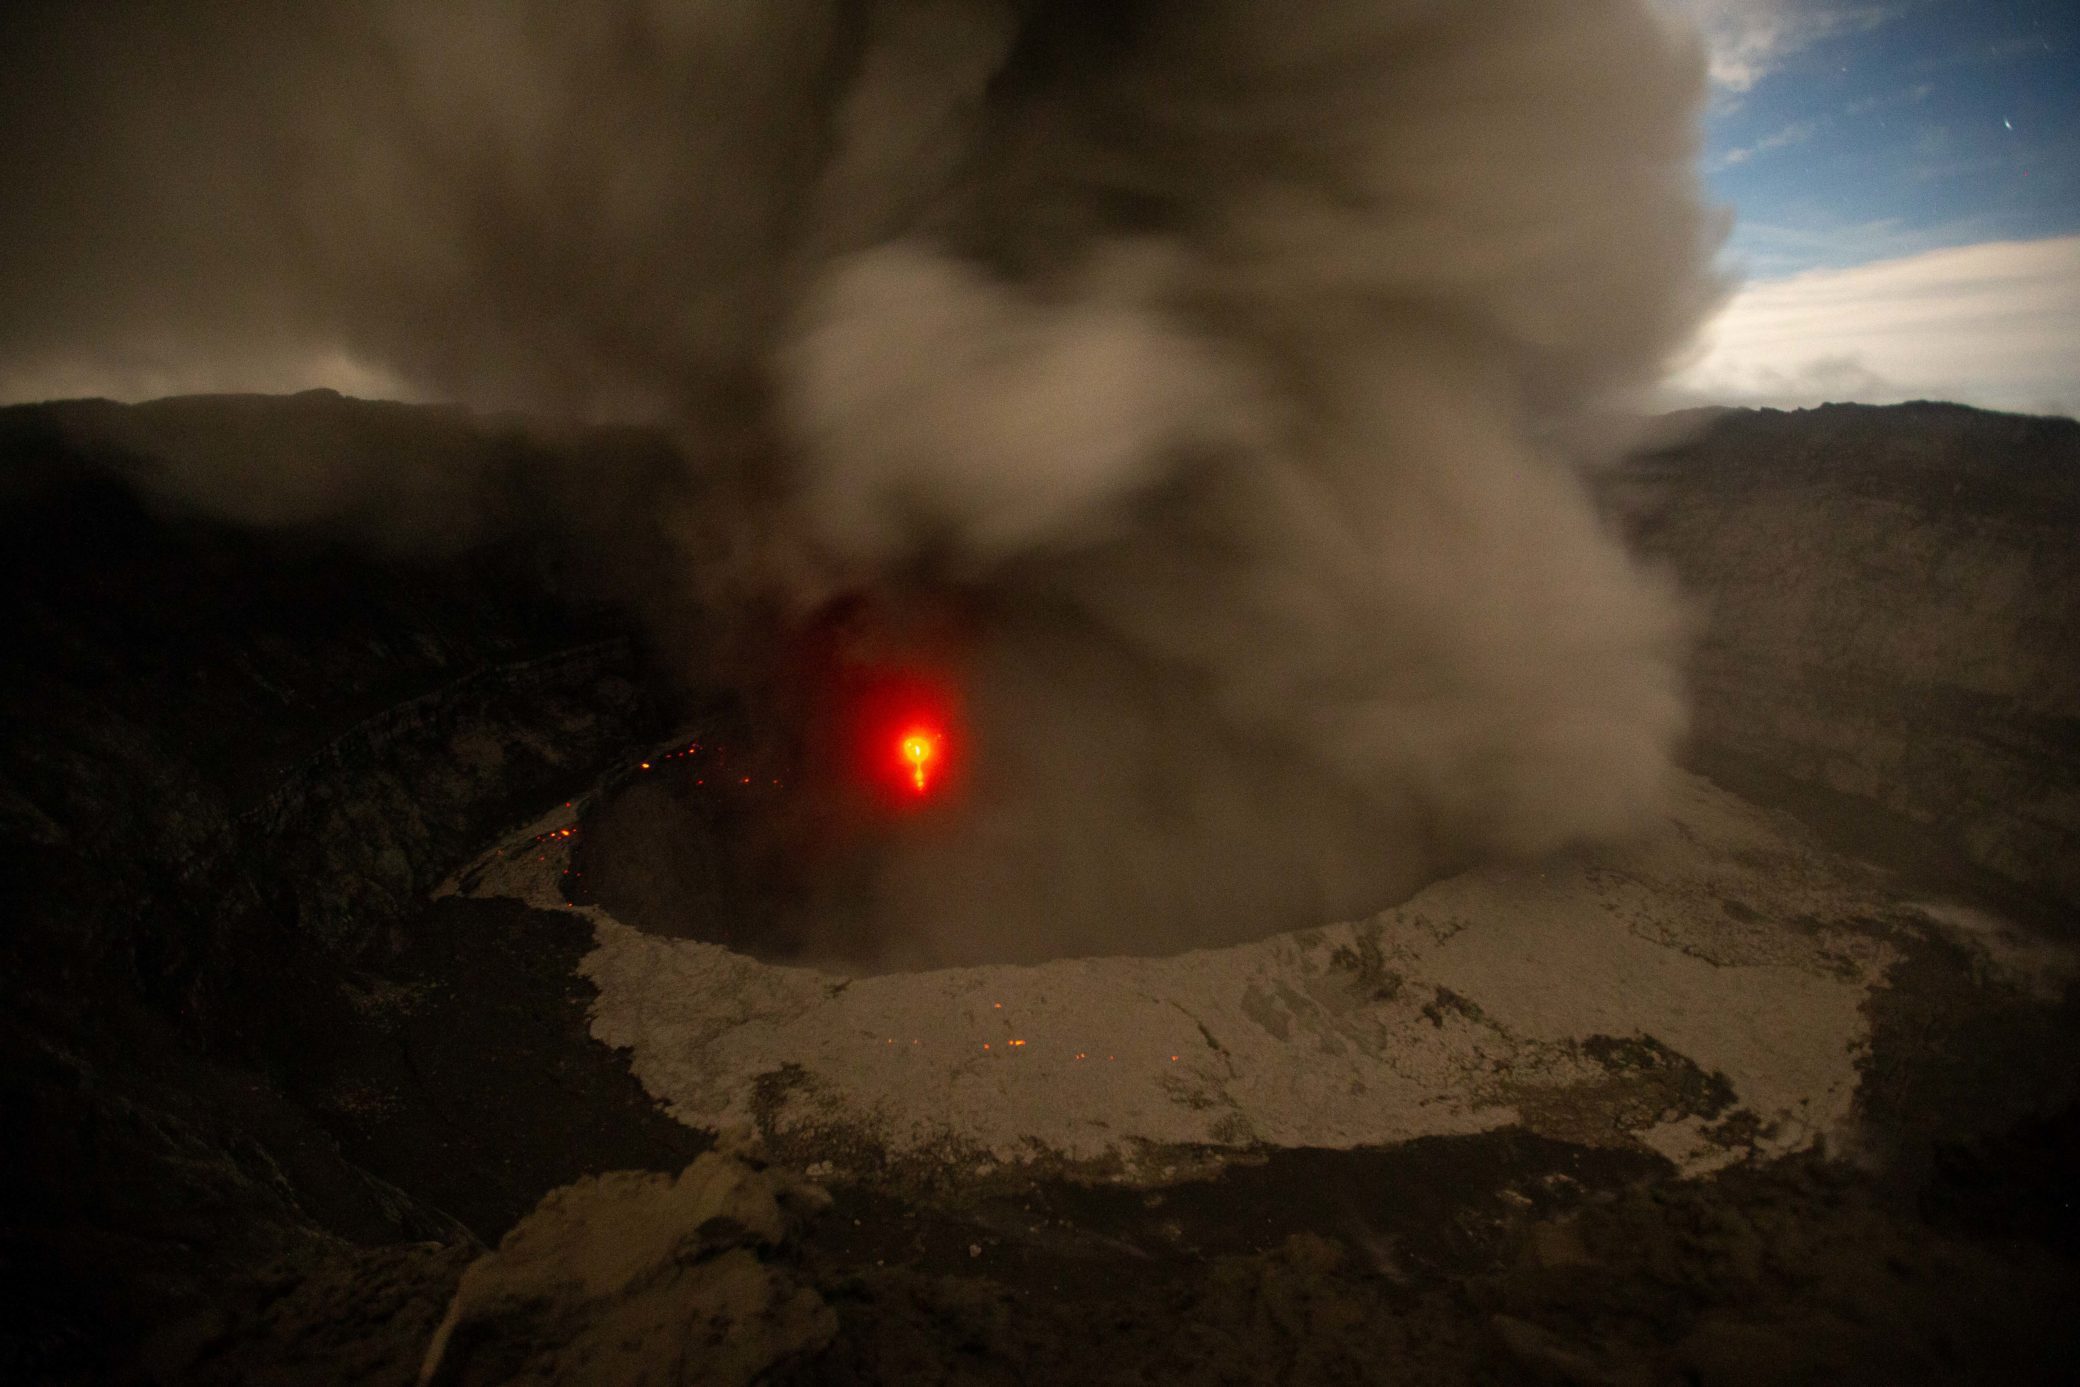 Mt Nyiragongo eruption in 2021 showing ash around the crater by photographer Christopher Horsley